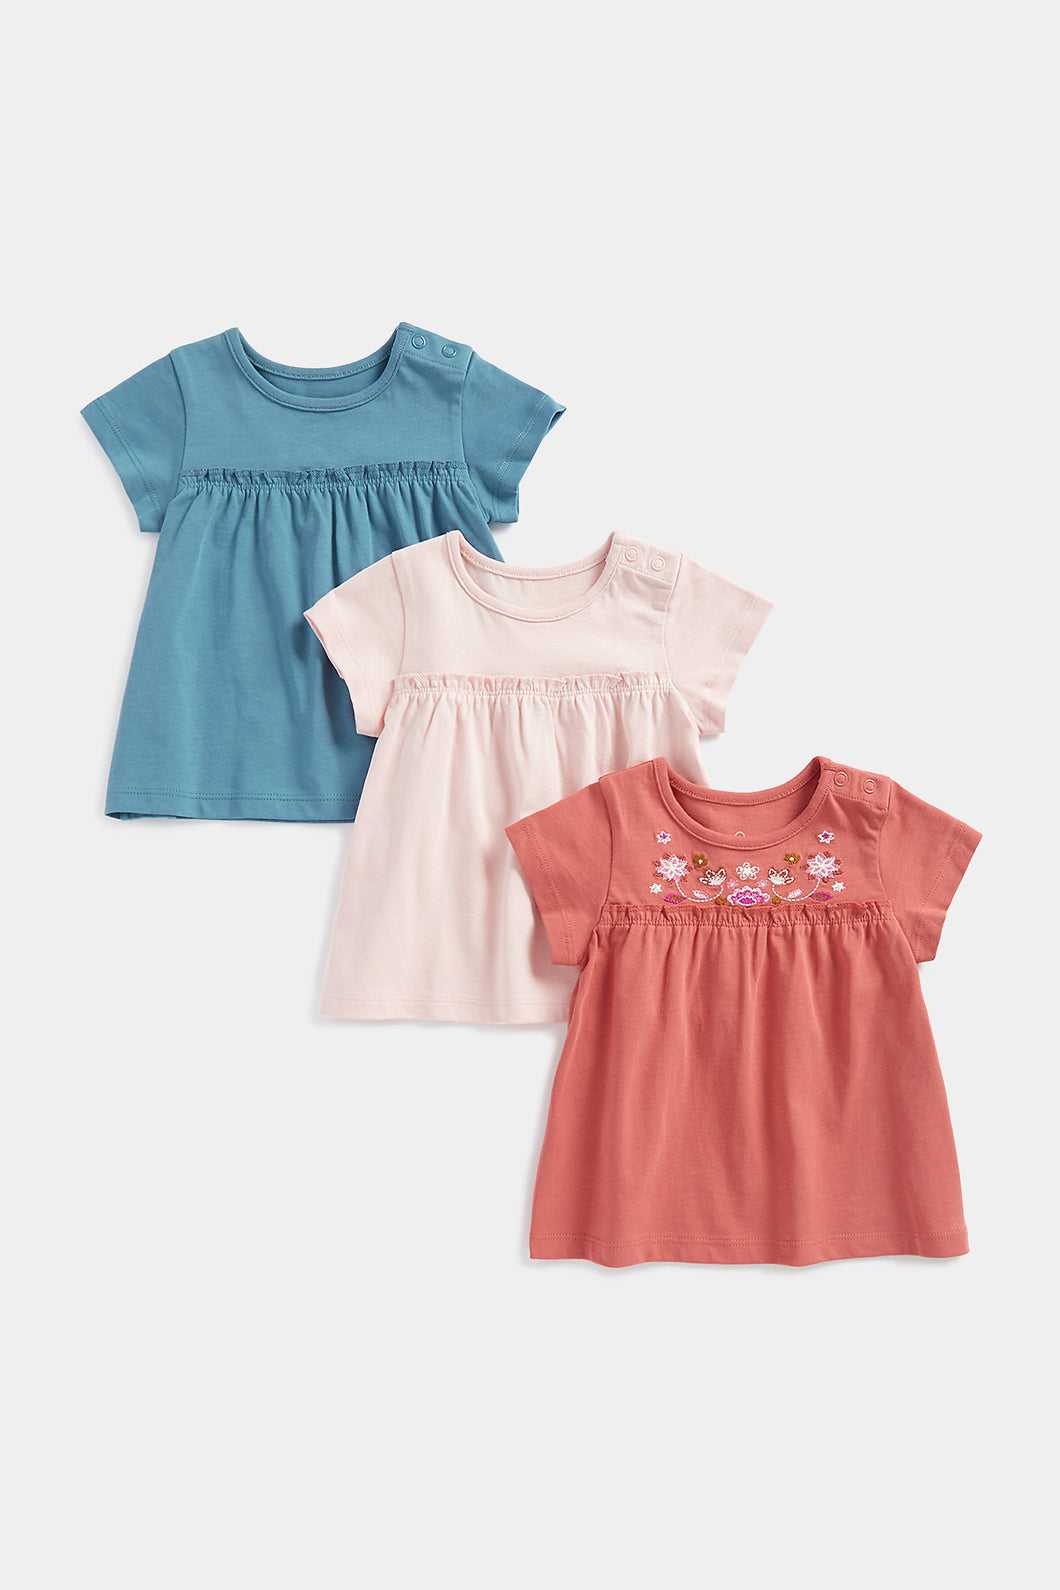 Mothercare Multi Frilled T-Shirts - 3 Pack